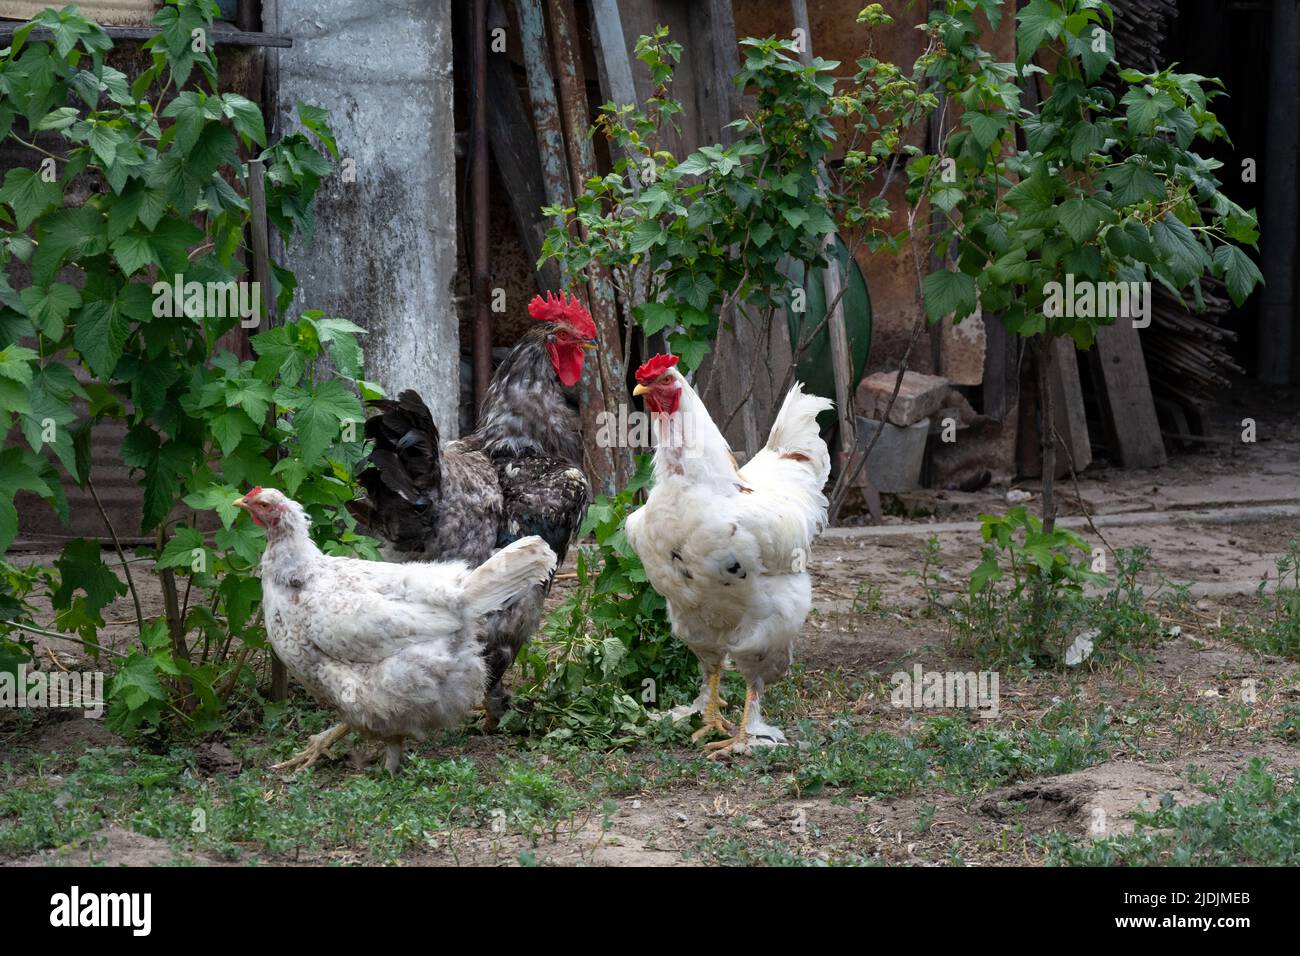 A rooster and two free-range hens among the raspberry bushes in the backyard Stock Photo